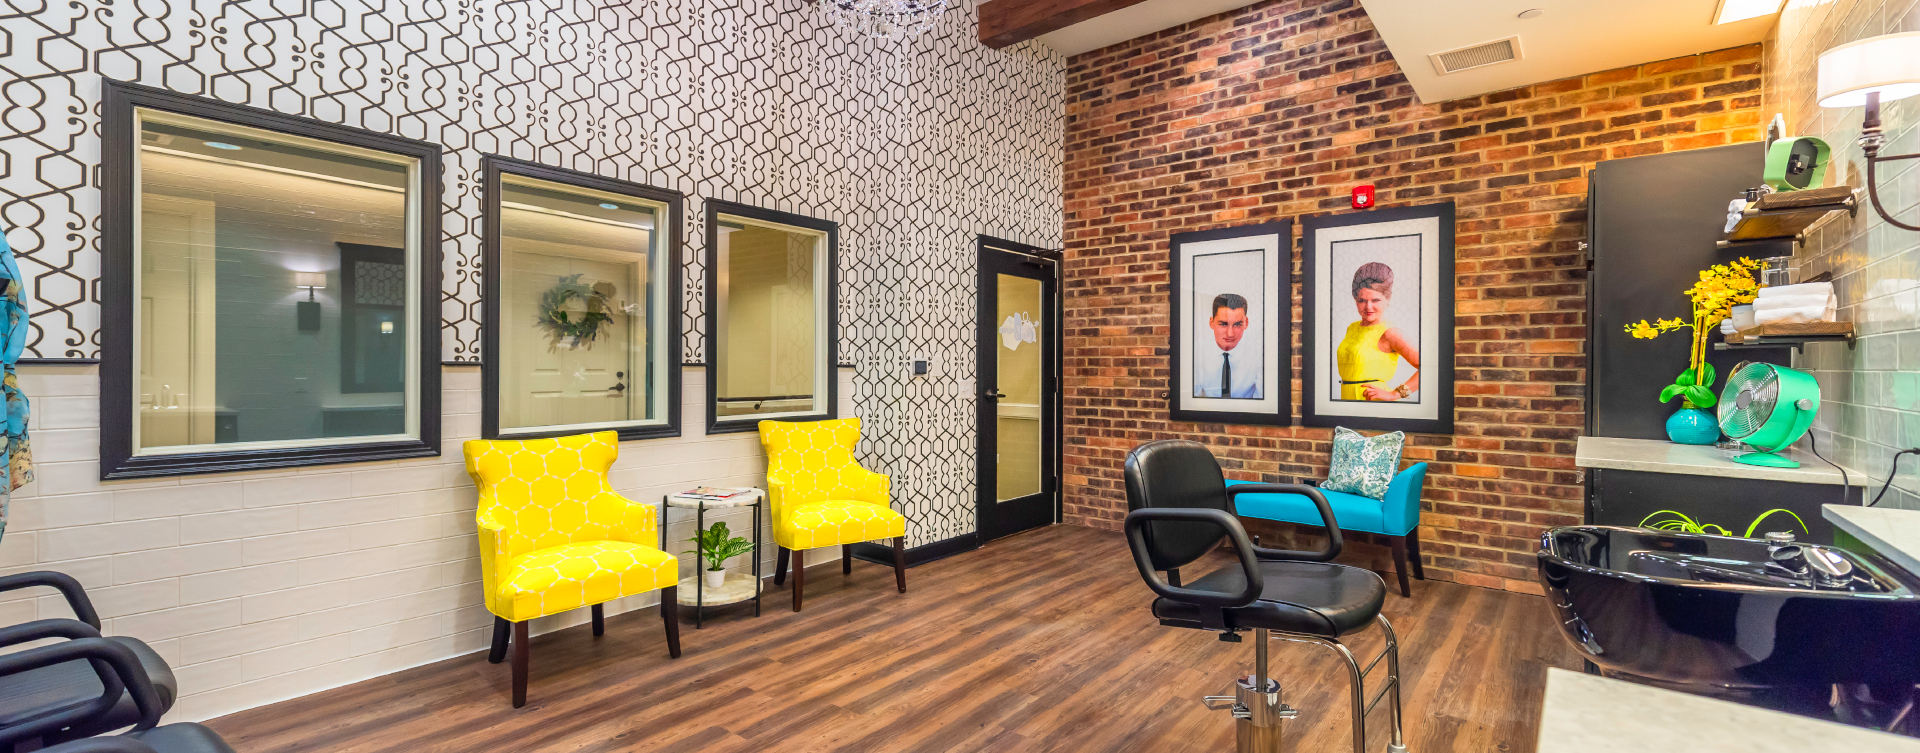 Strut on in and find out what the buzz is all about in the salon at Bickford of Shelby Township